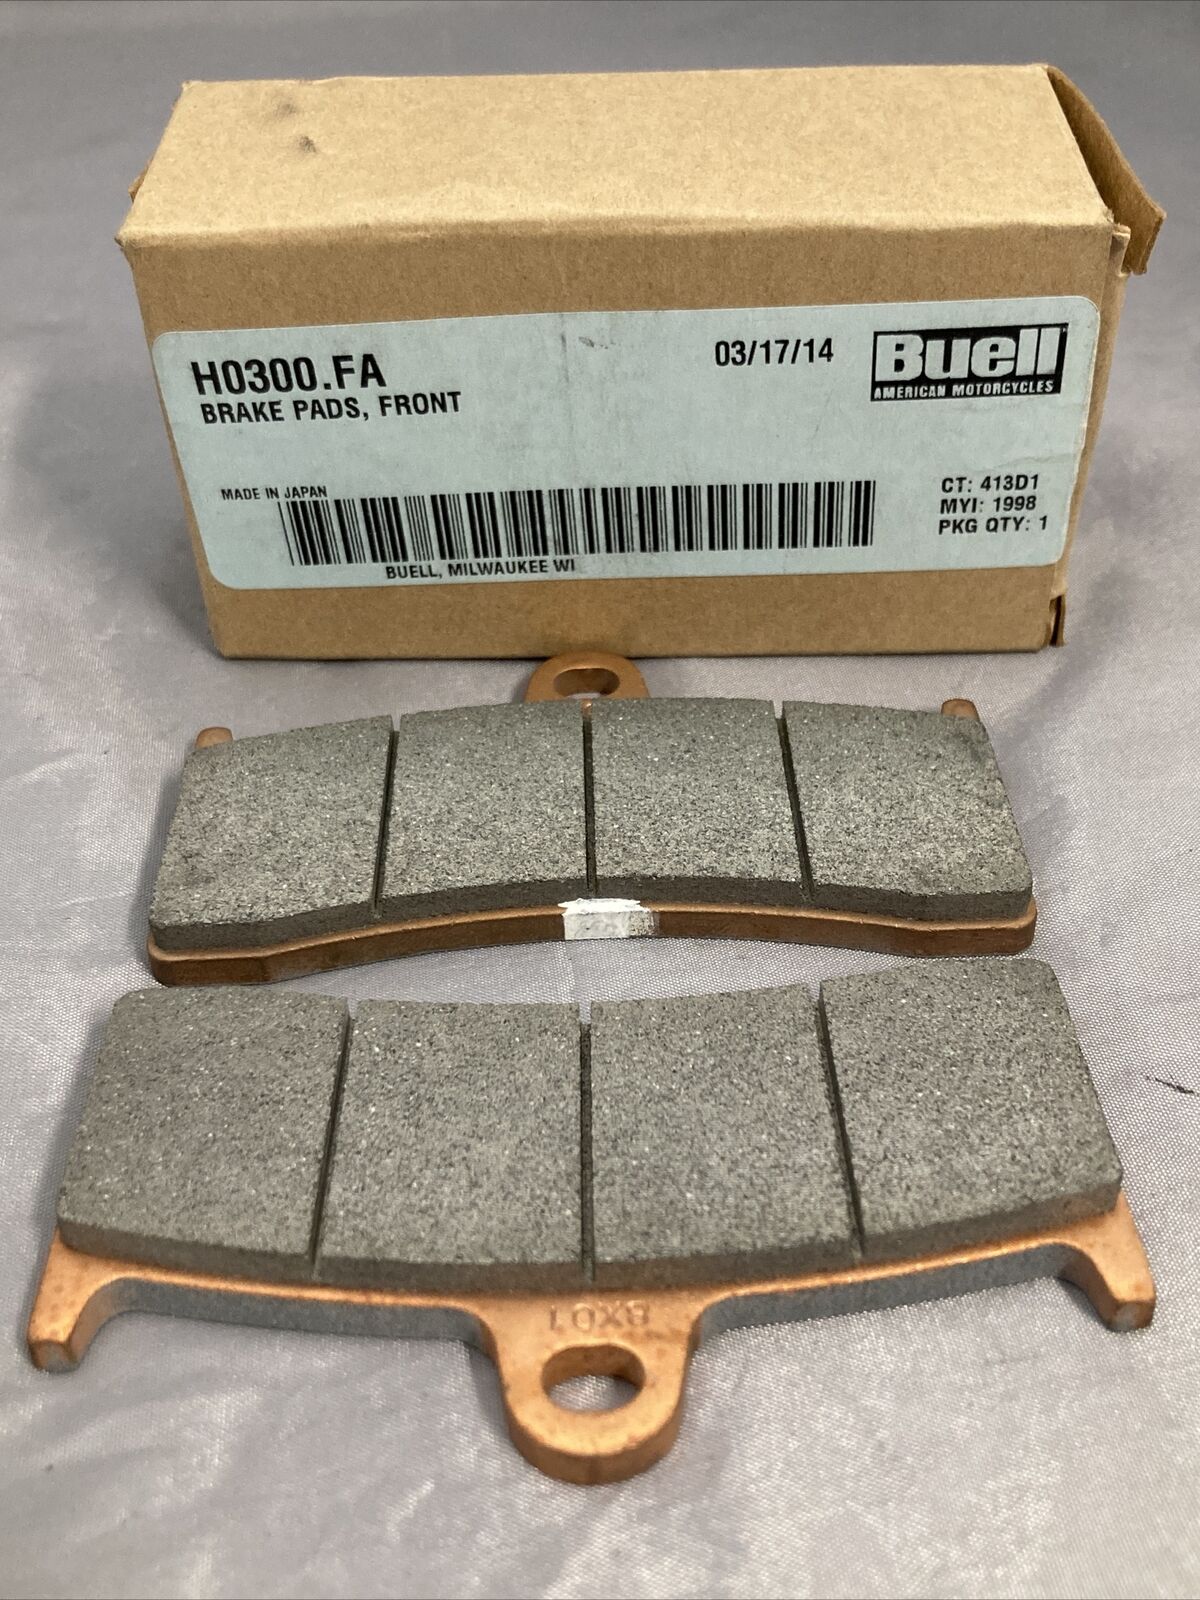 NEW GENUINE BUELL H0300.FA BRAKE PADS, FRONT